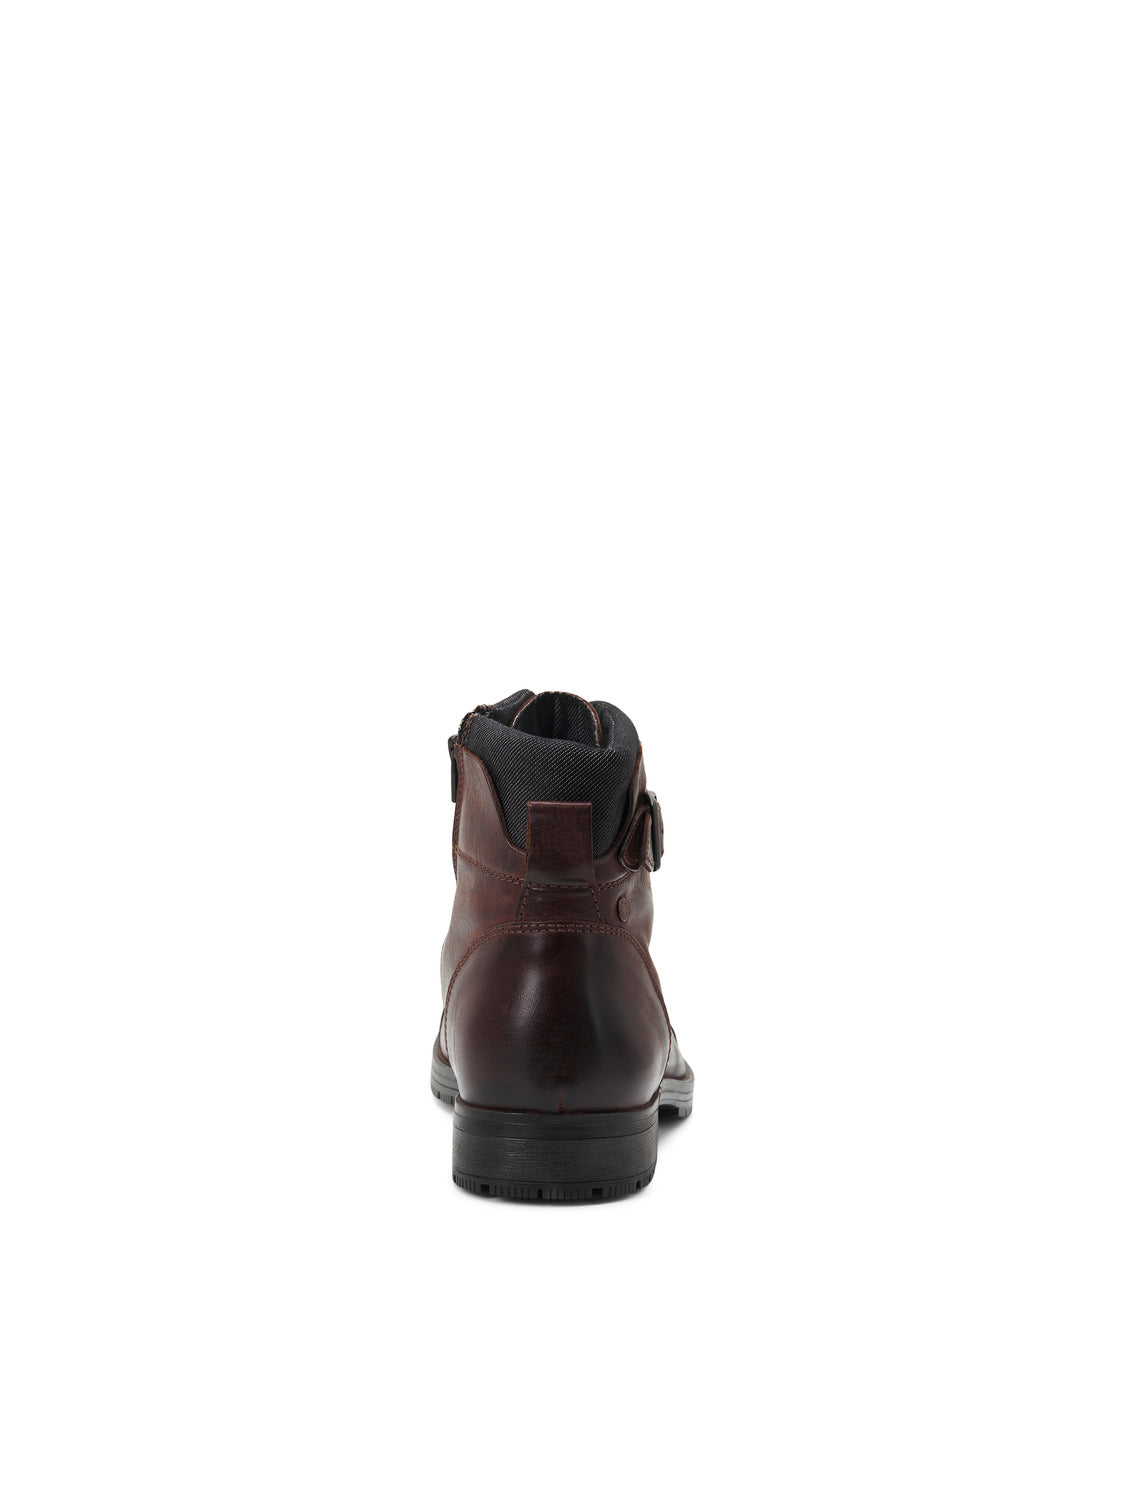 JFWALBANY Boots - brown stone